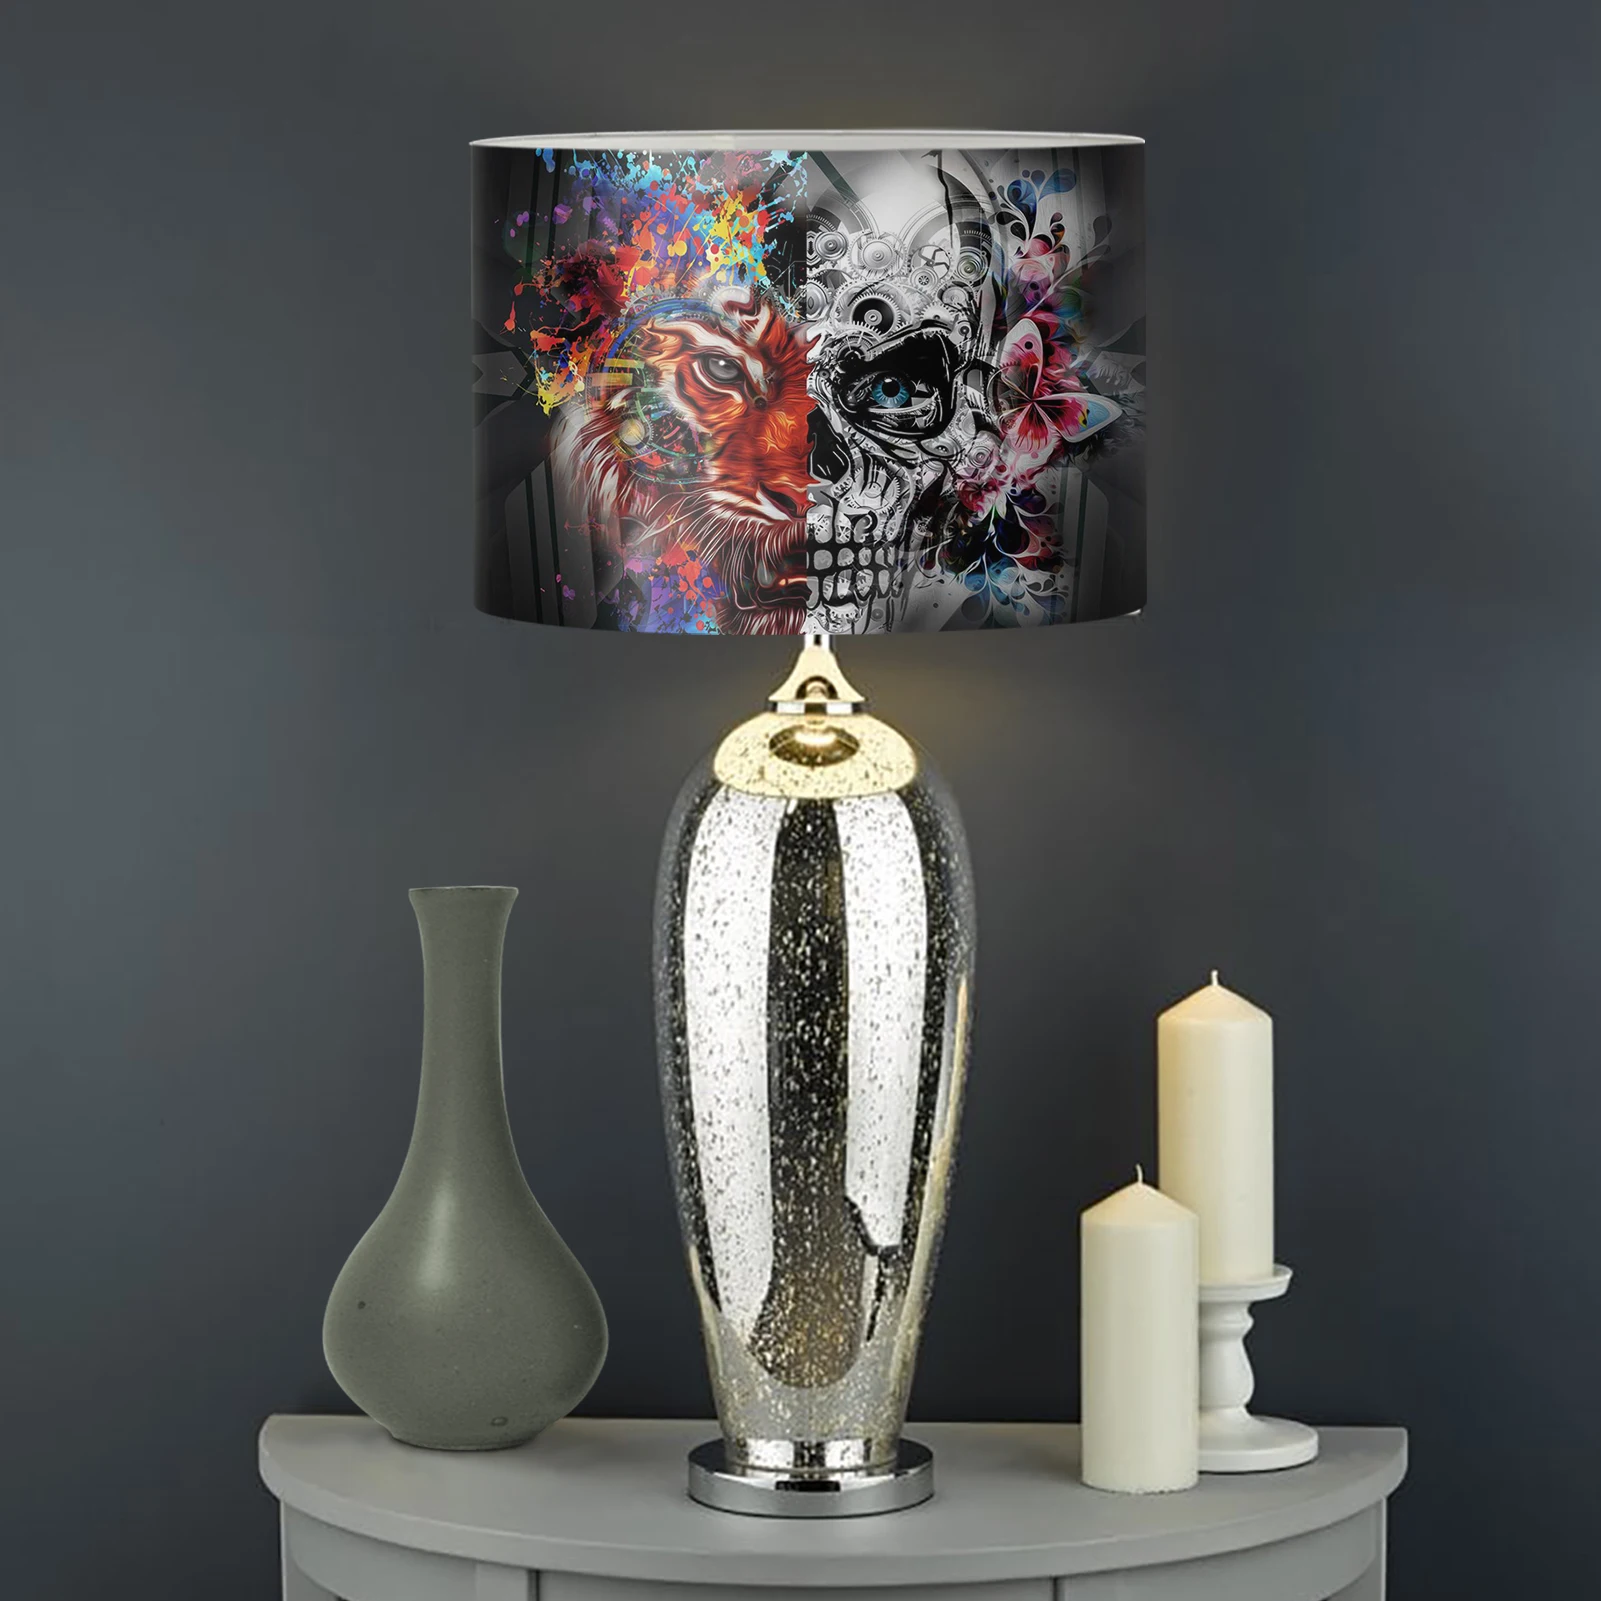 Skull Floral Print Halloween Gift Table Lampshade Bedroom Lamp Shade Covers Dust Proof Lamp Cover Light Lamp Screen Abat Jour